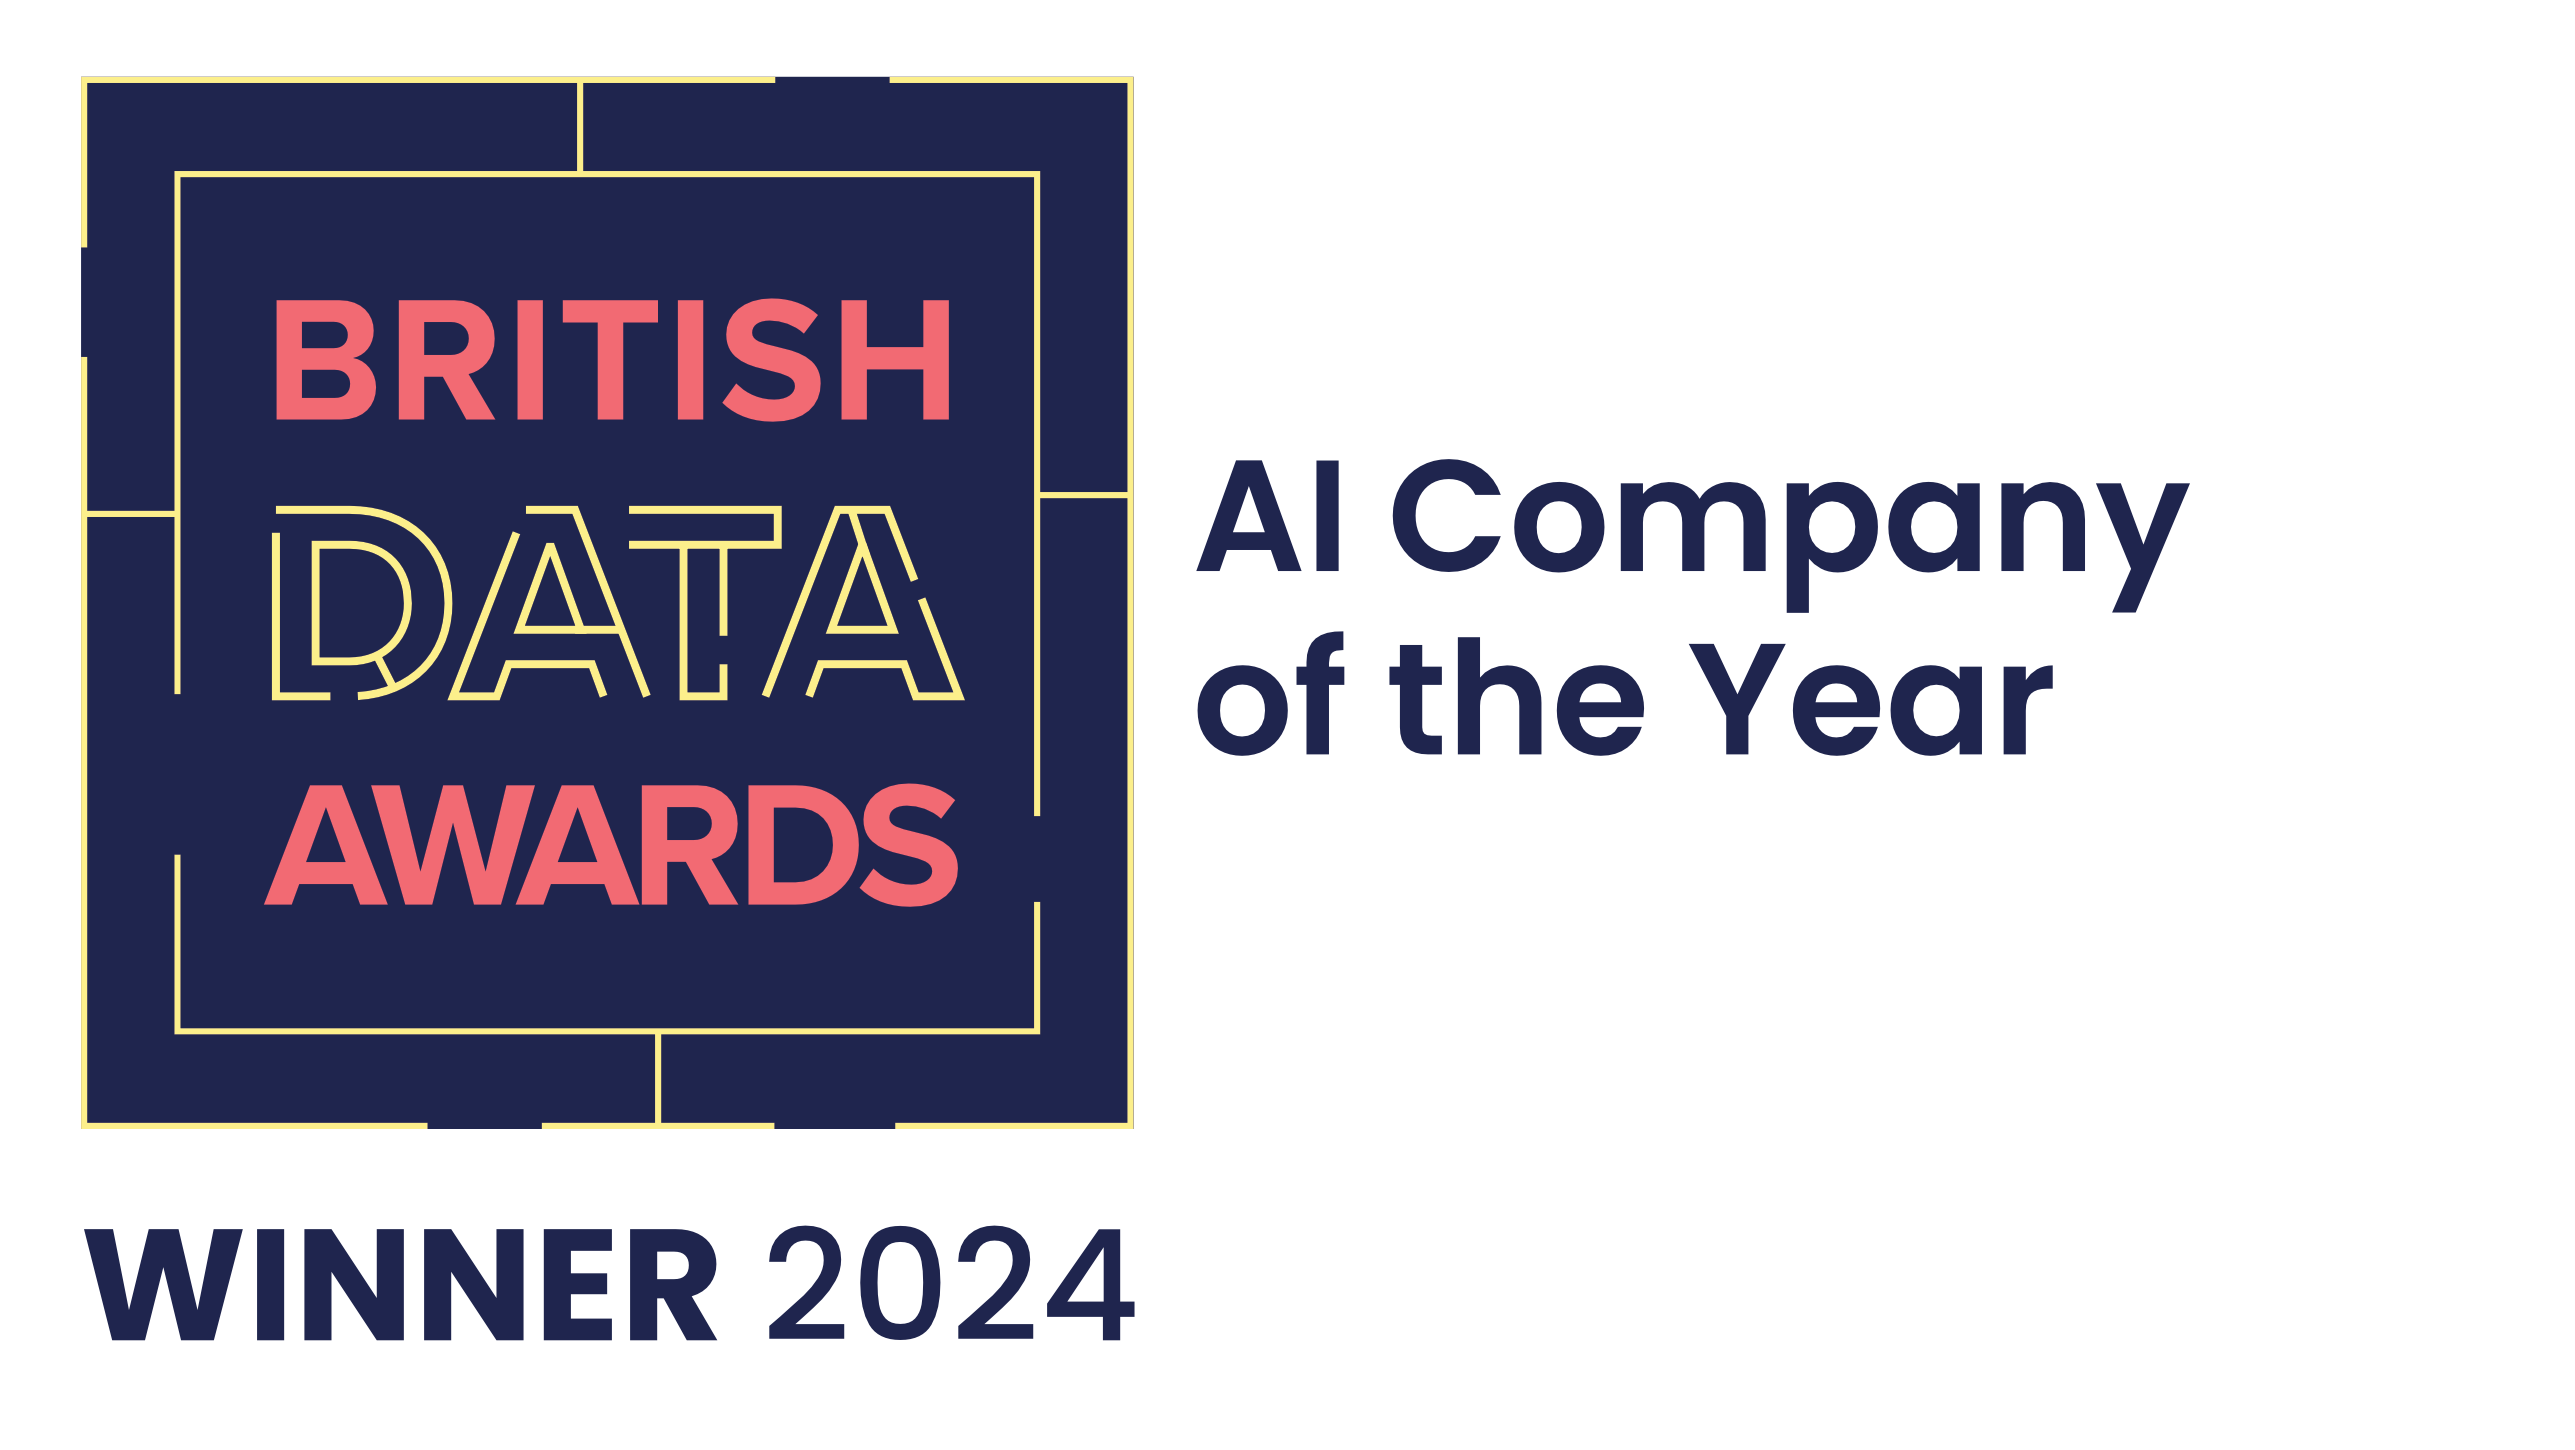 Intent HQ is an AI customer analytics platform named AI Company of the Year at the British Data Awards.